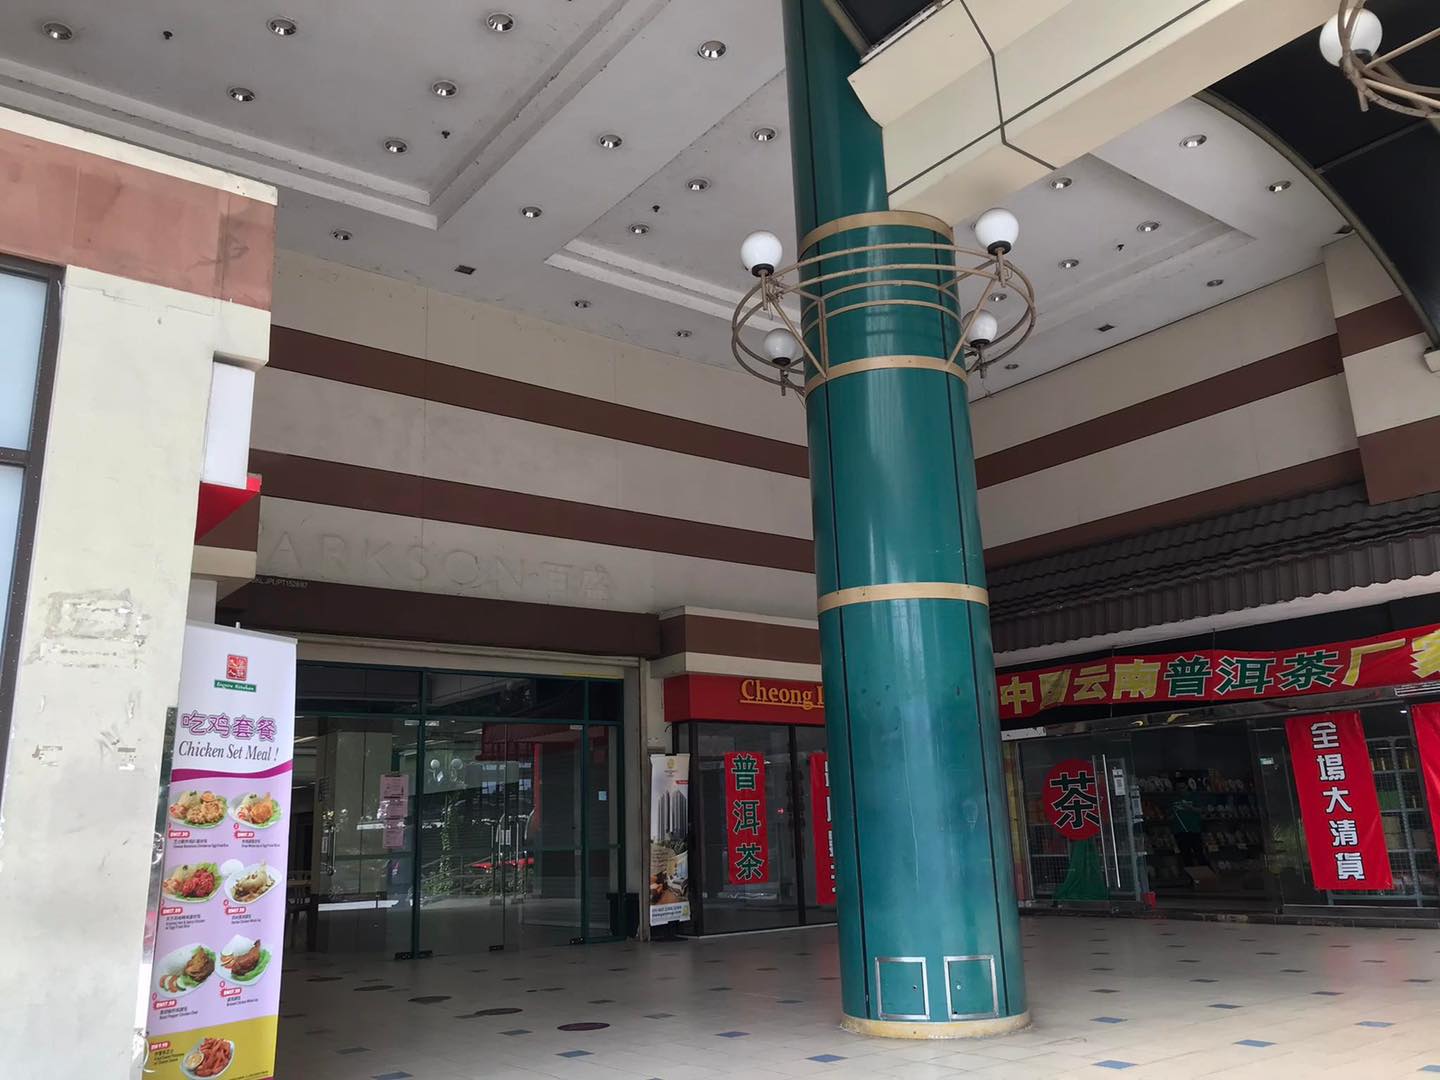 Plaza OUG is slated to be demolished by this year. Image credit: Malaysia Shopping Mall